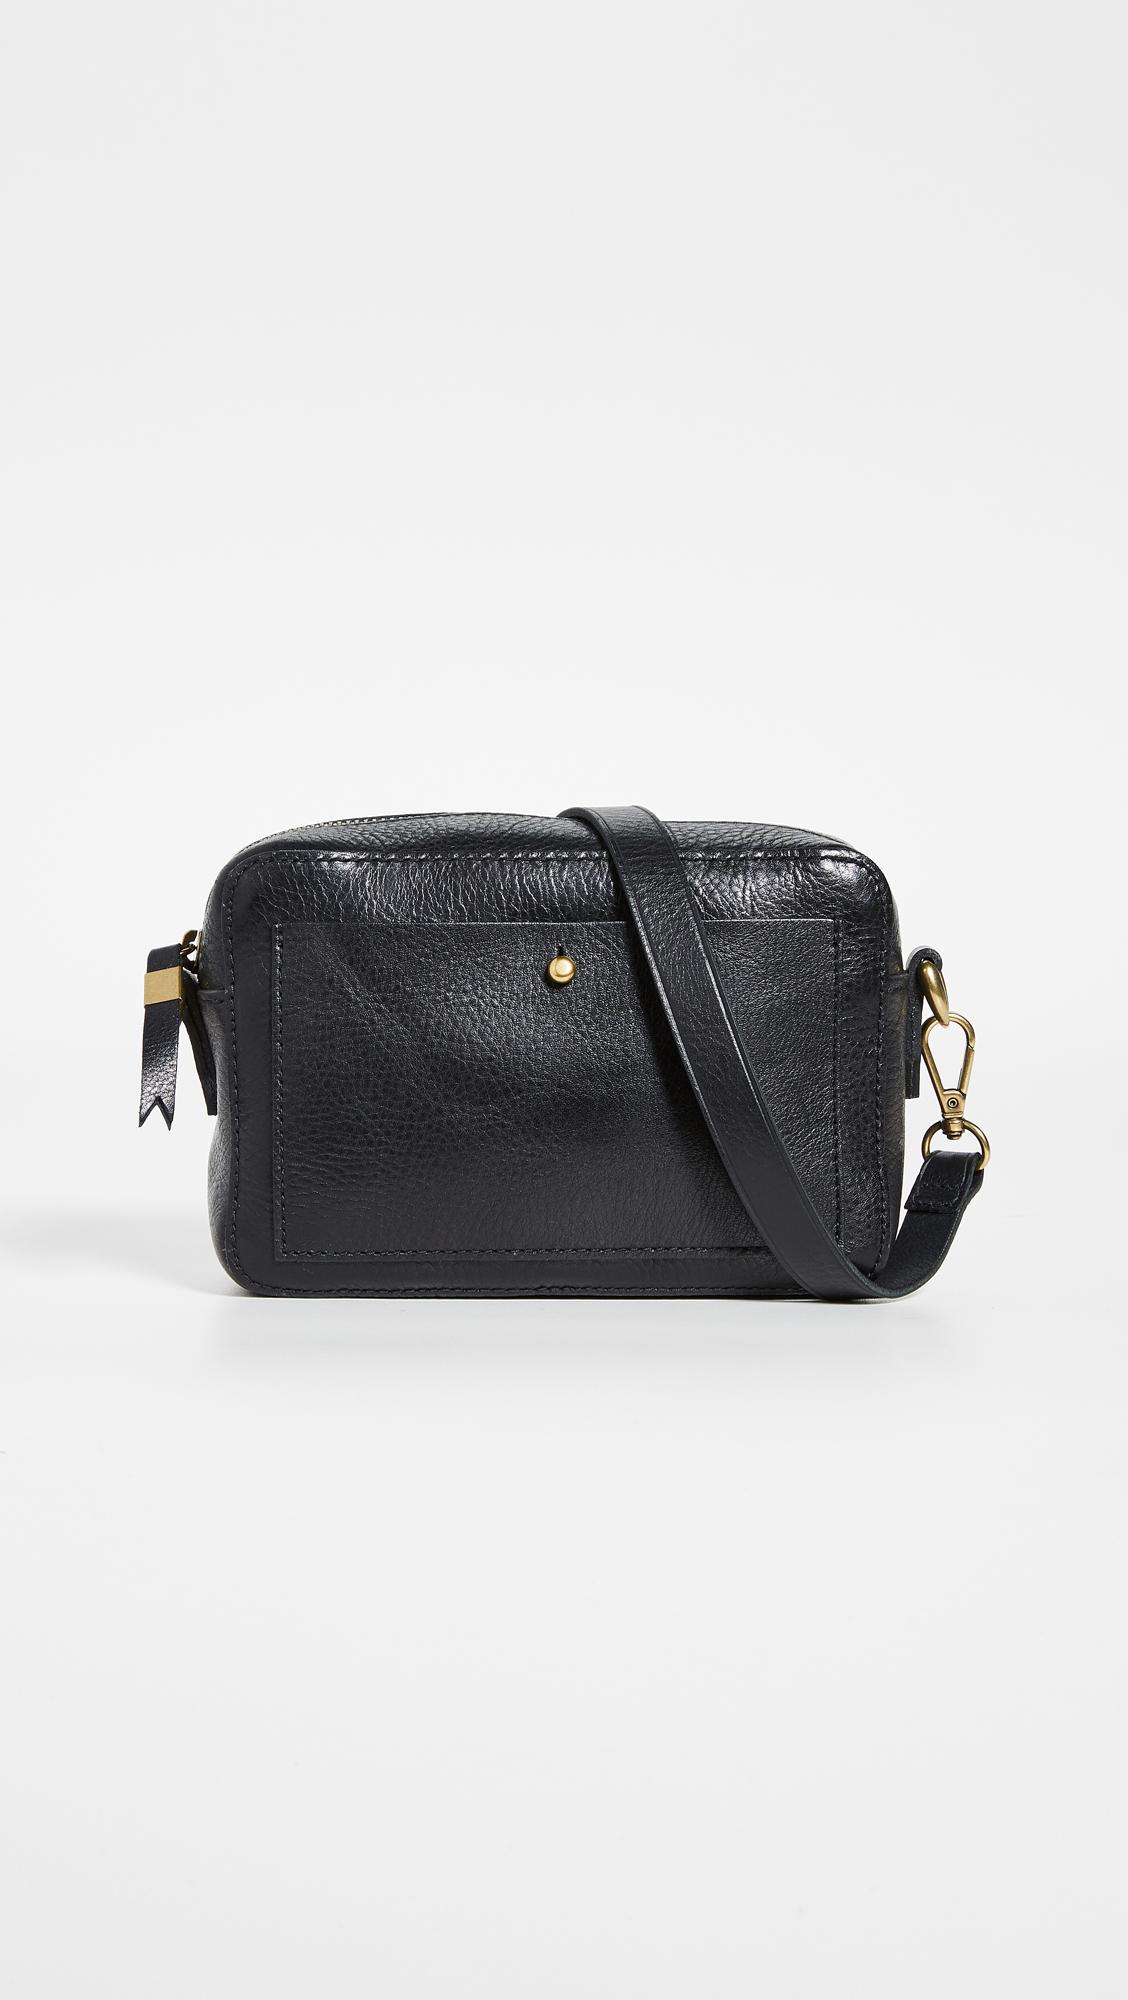 Madewell The Transport Camera Bag in Black | Lyst